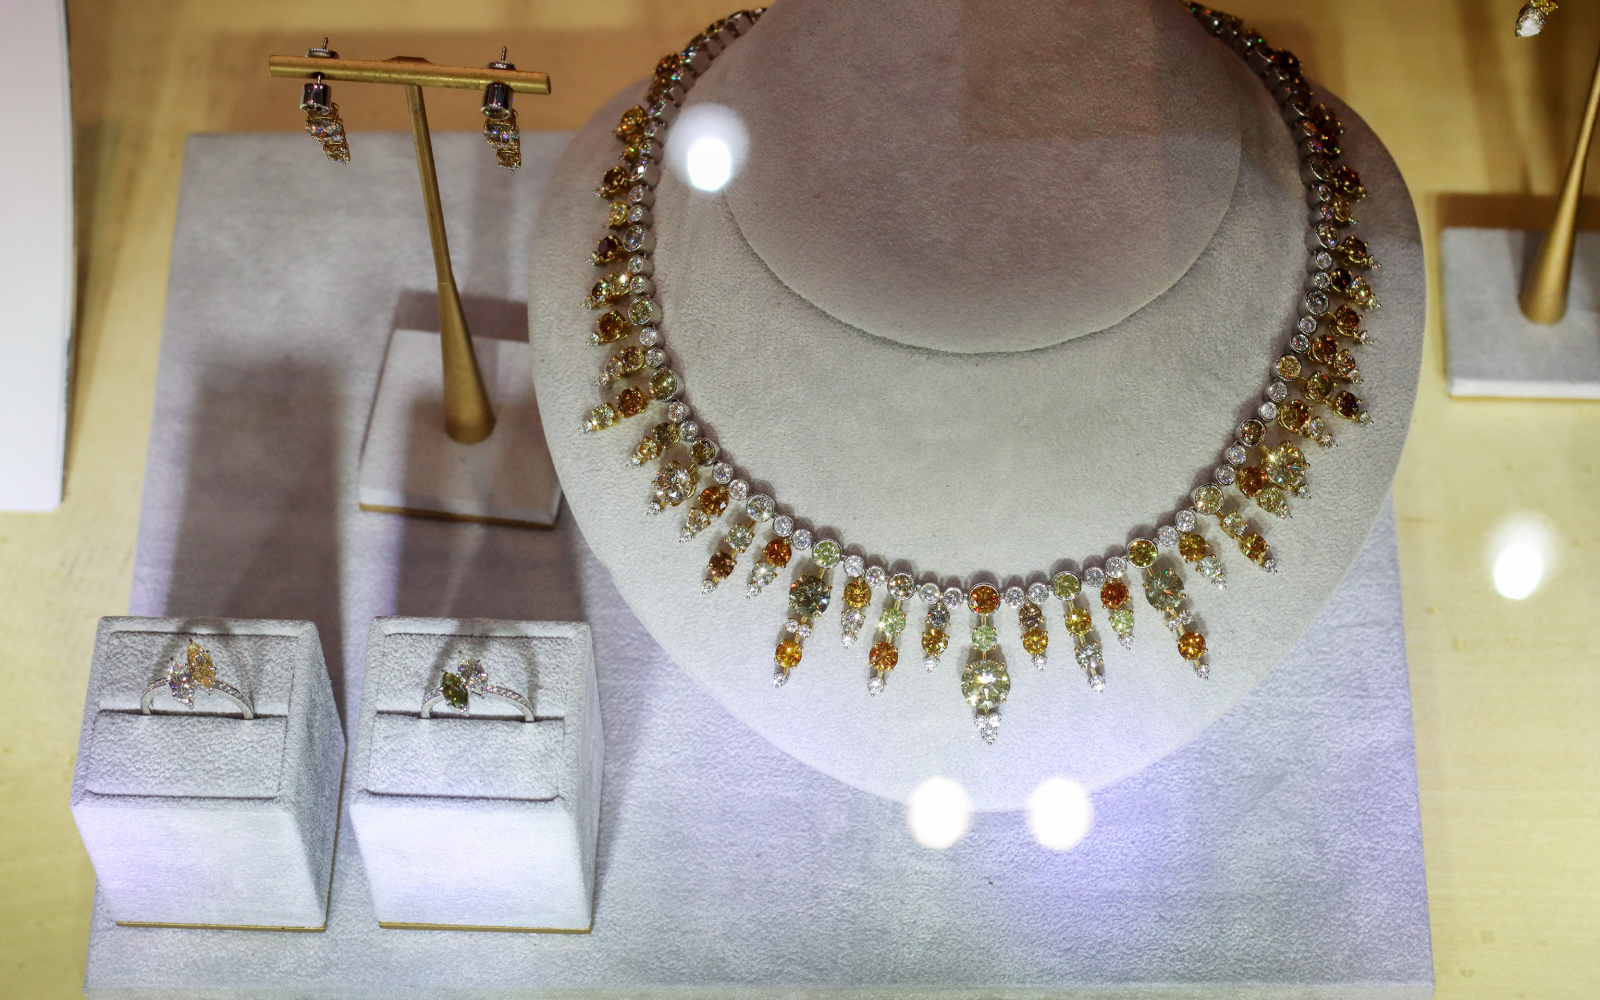 Pieces from the House of GOL Autumn collection, including a necklace with 65.58 carats of natural golden colour diamonds set in 18k yellow gold and platinum